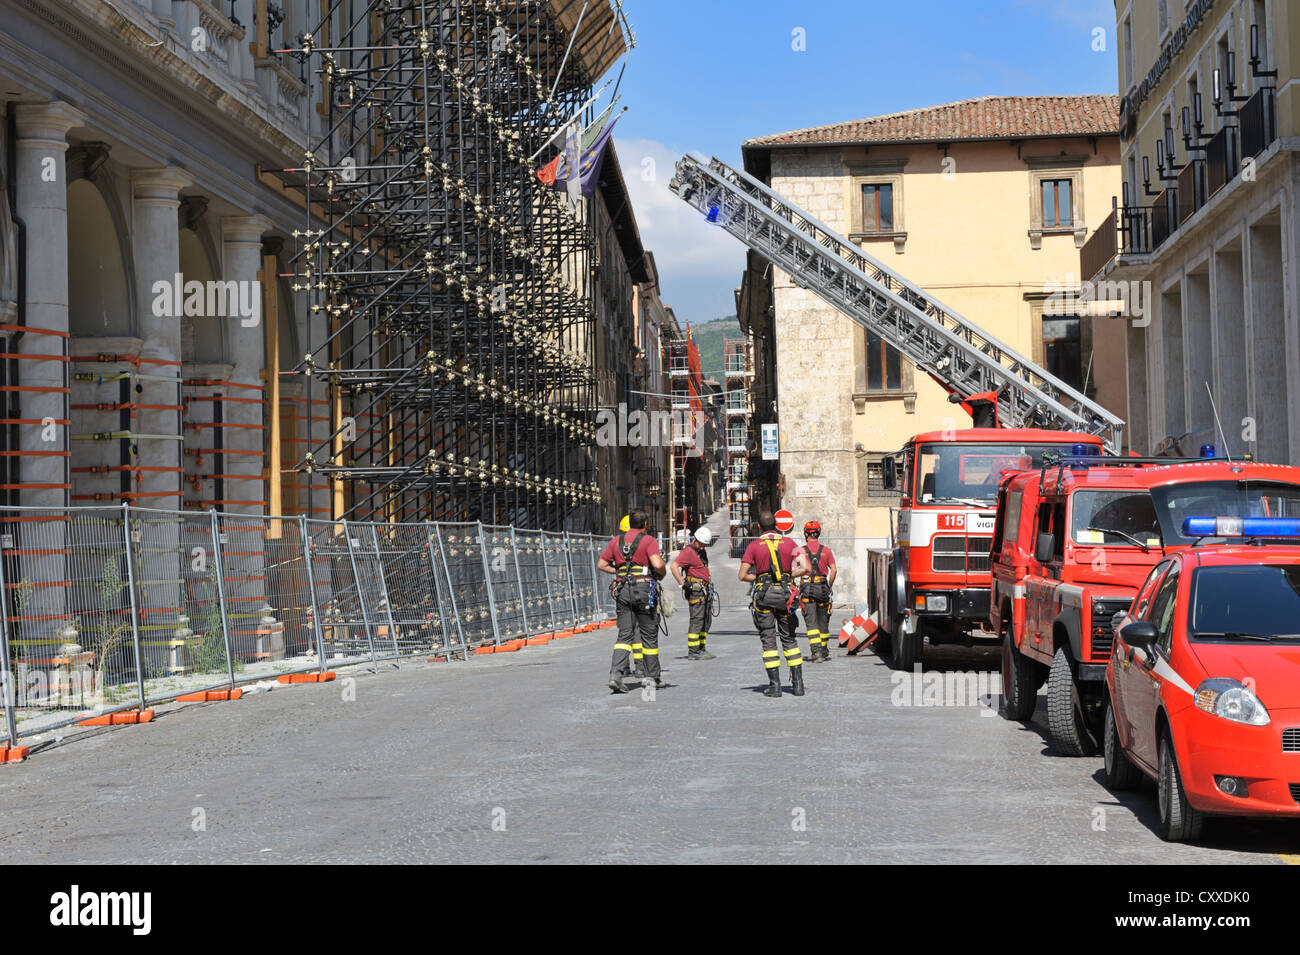 Safety activities in the historic town center, fire brigade, buildings damaged by the earthquake on 6th April 2009, L'Aquila Stock Photo